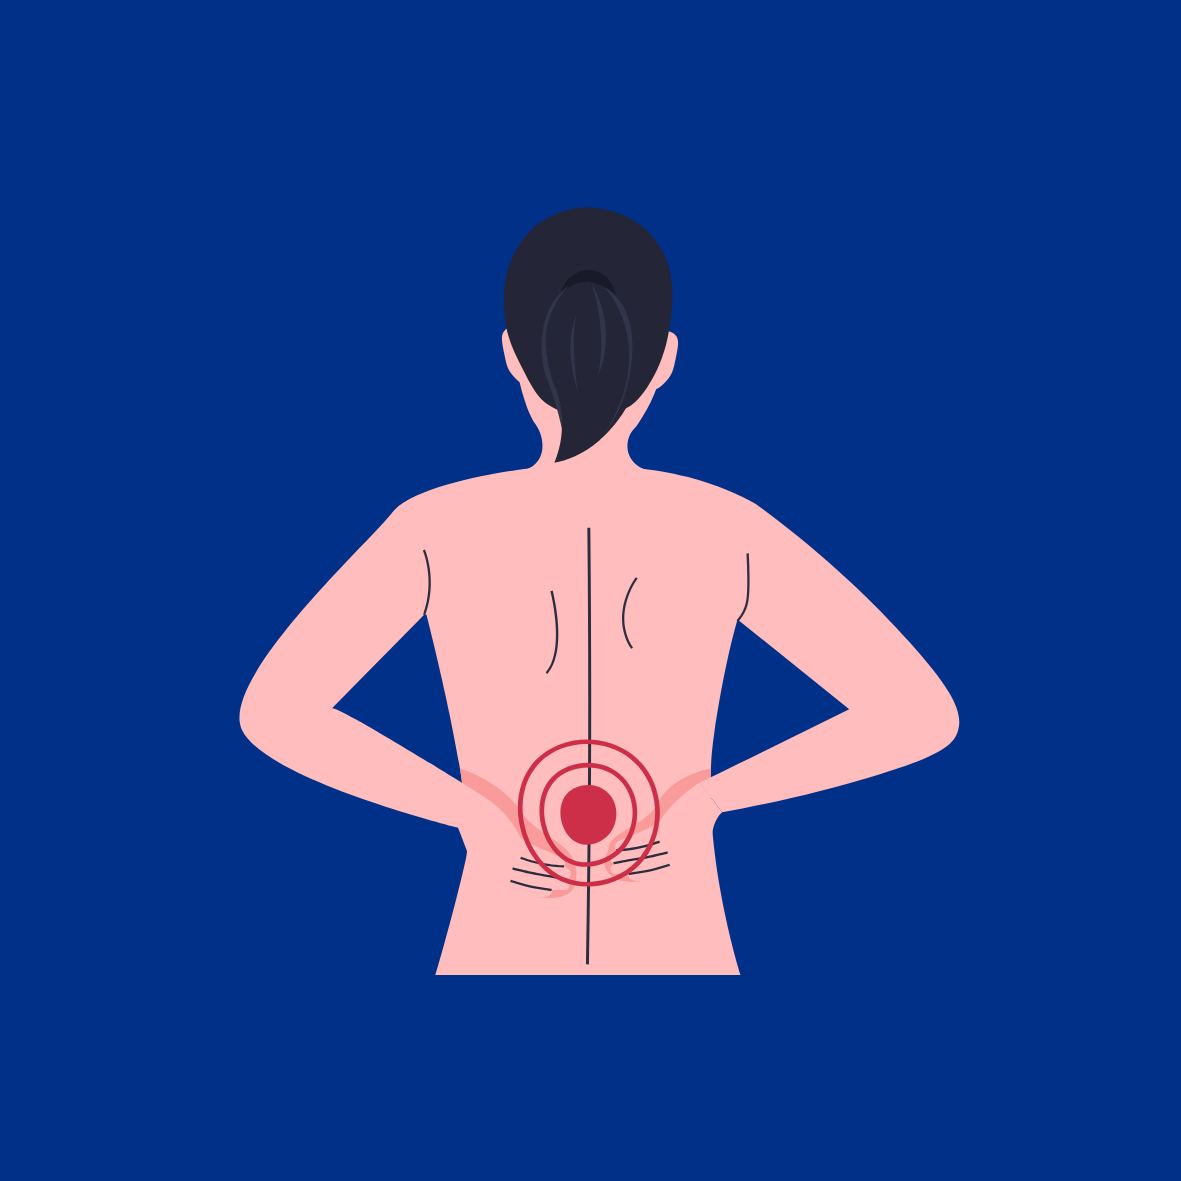 Image of a Person's Back Showing Radiating Back Pain